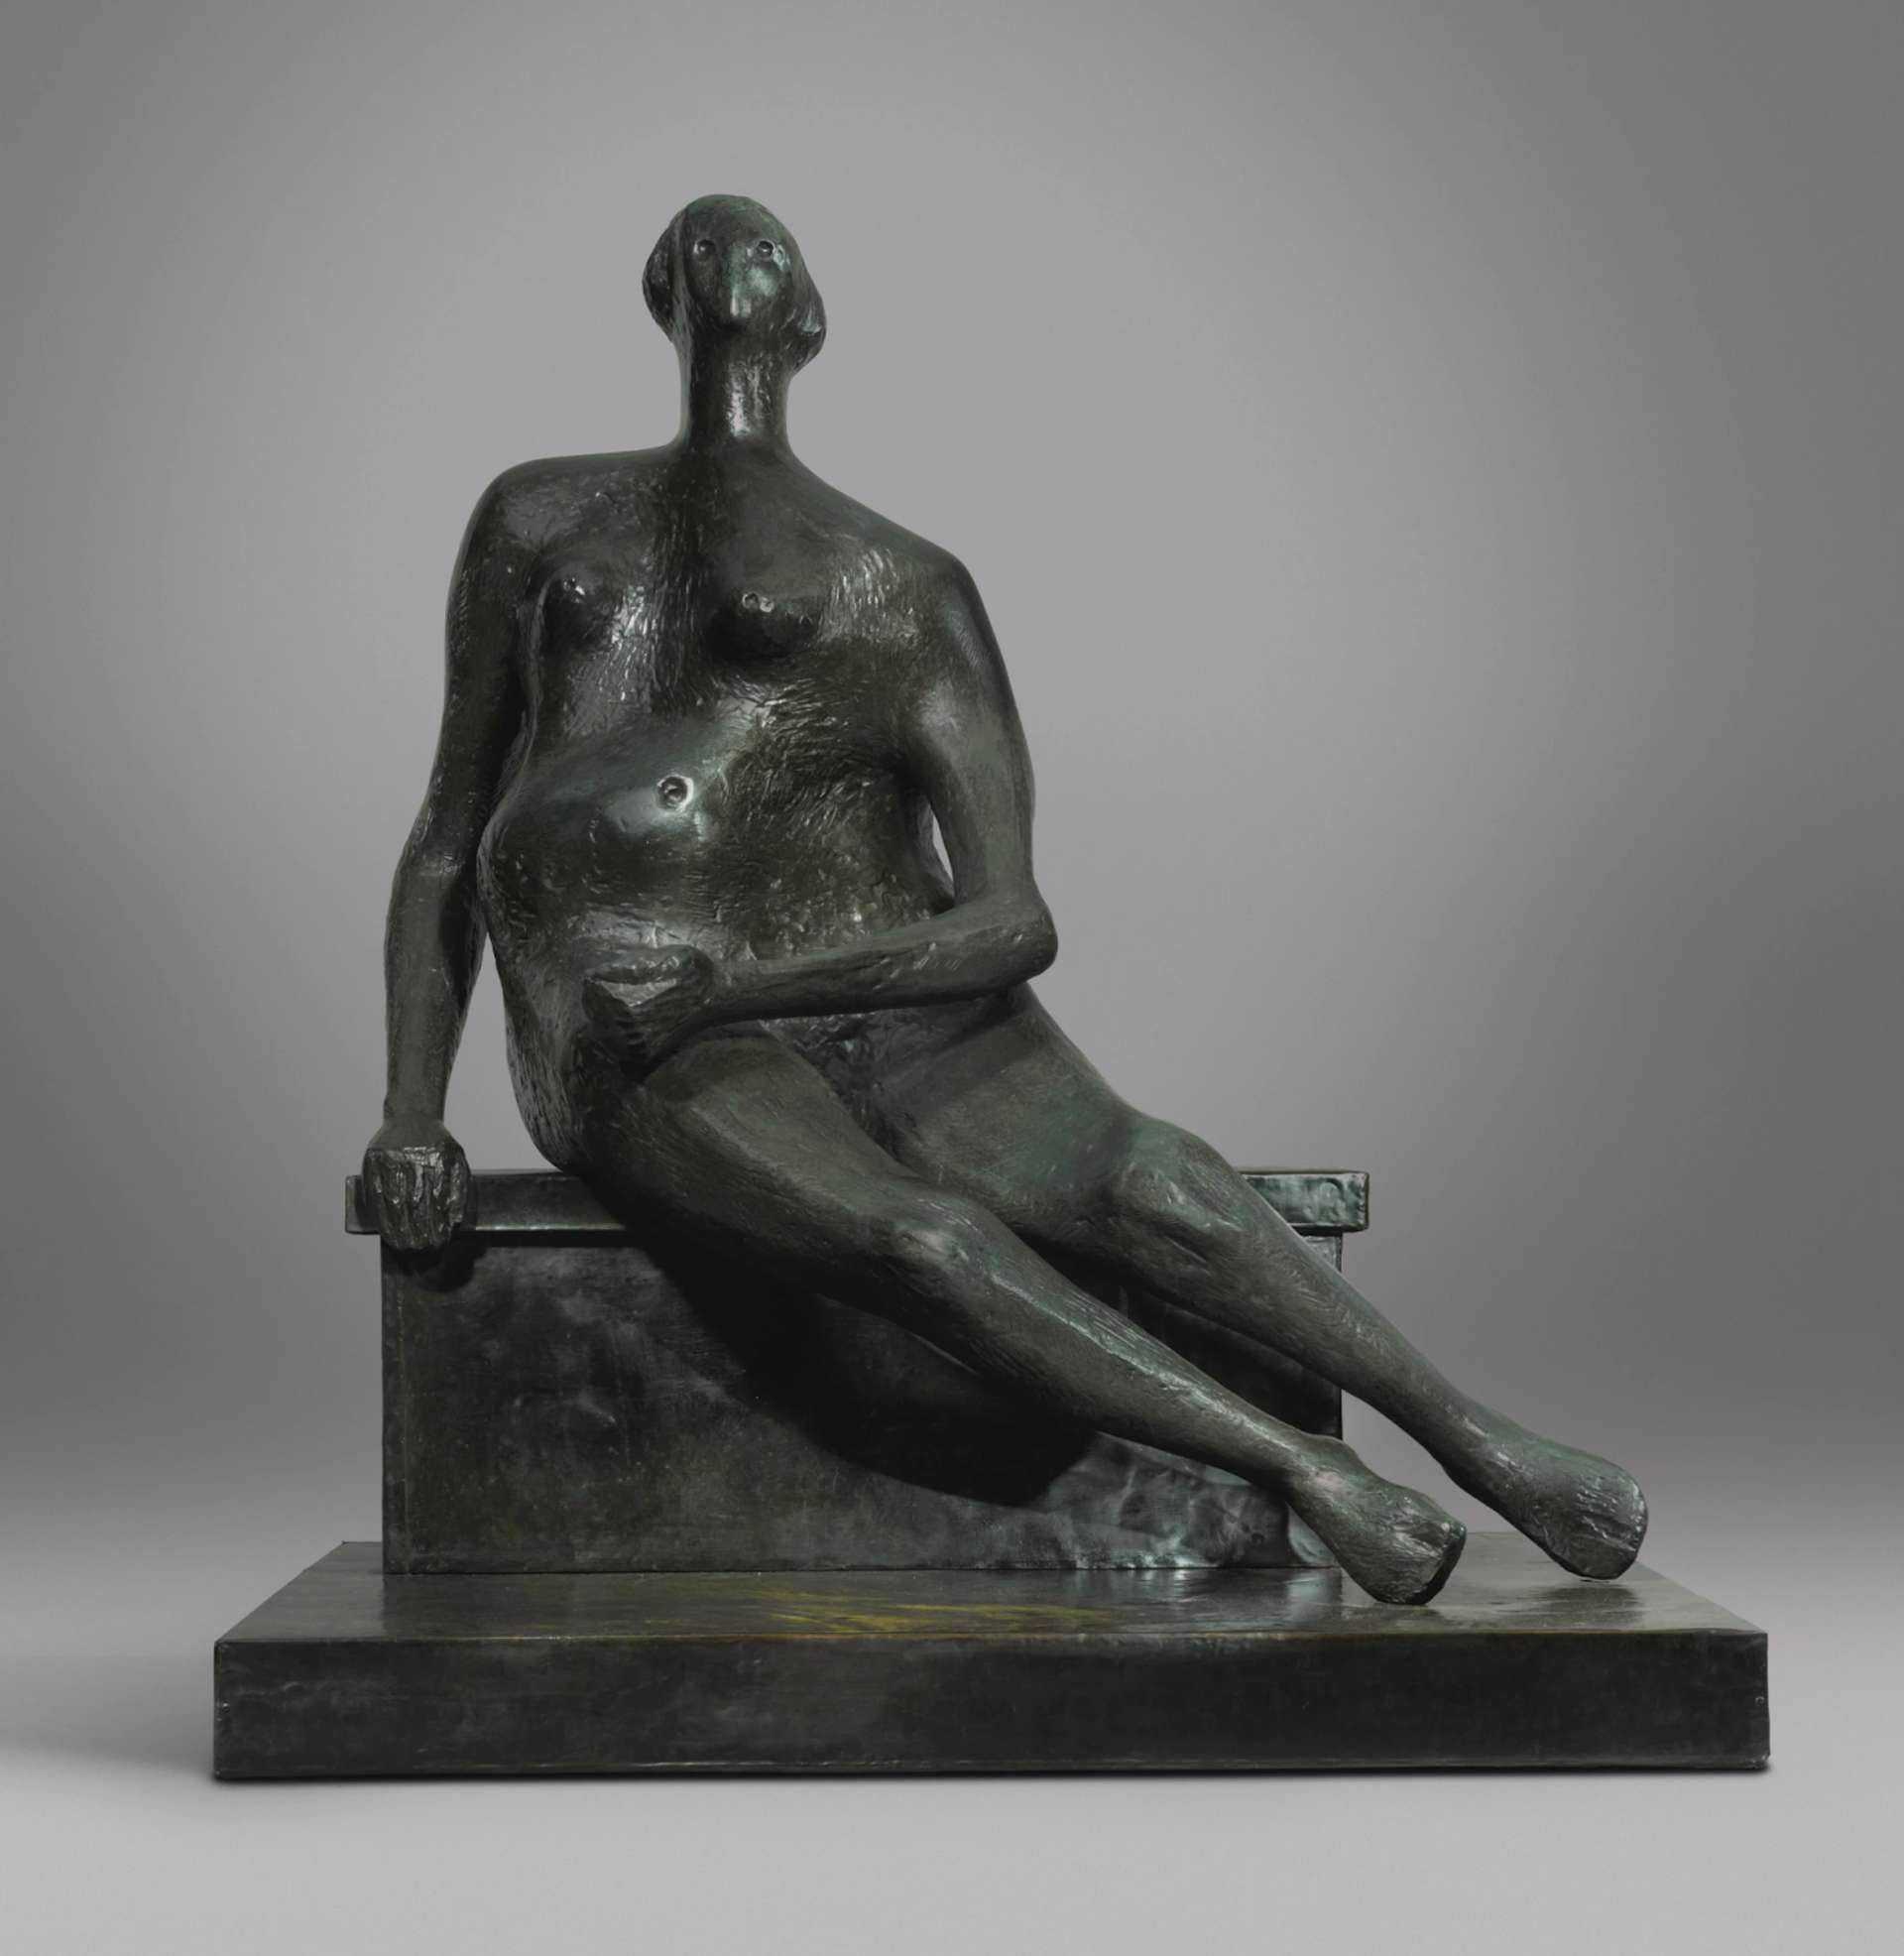 A bronze sculpture by Henry Moore depicting a seated woman with a broad torso and a prominent pregnancy. The sculpture is positioned on a pedestal.